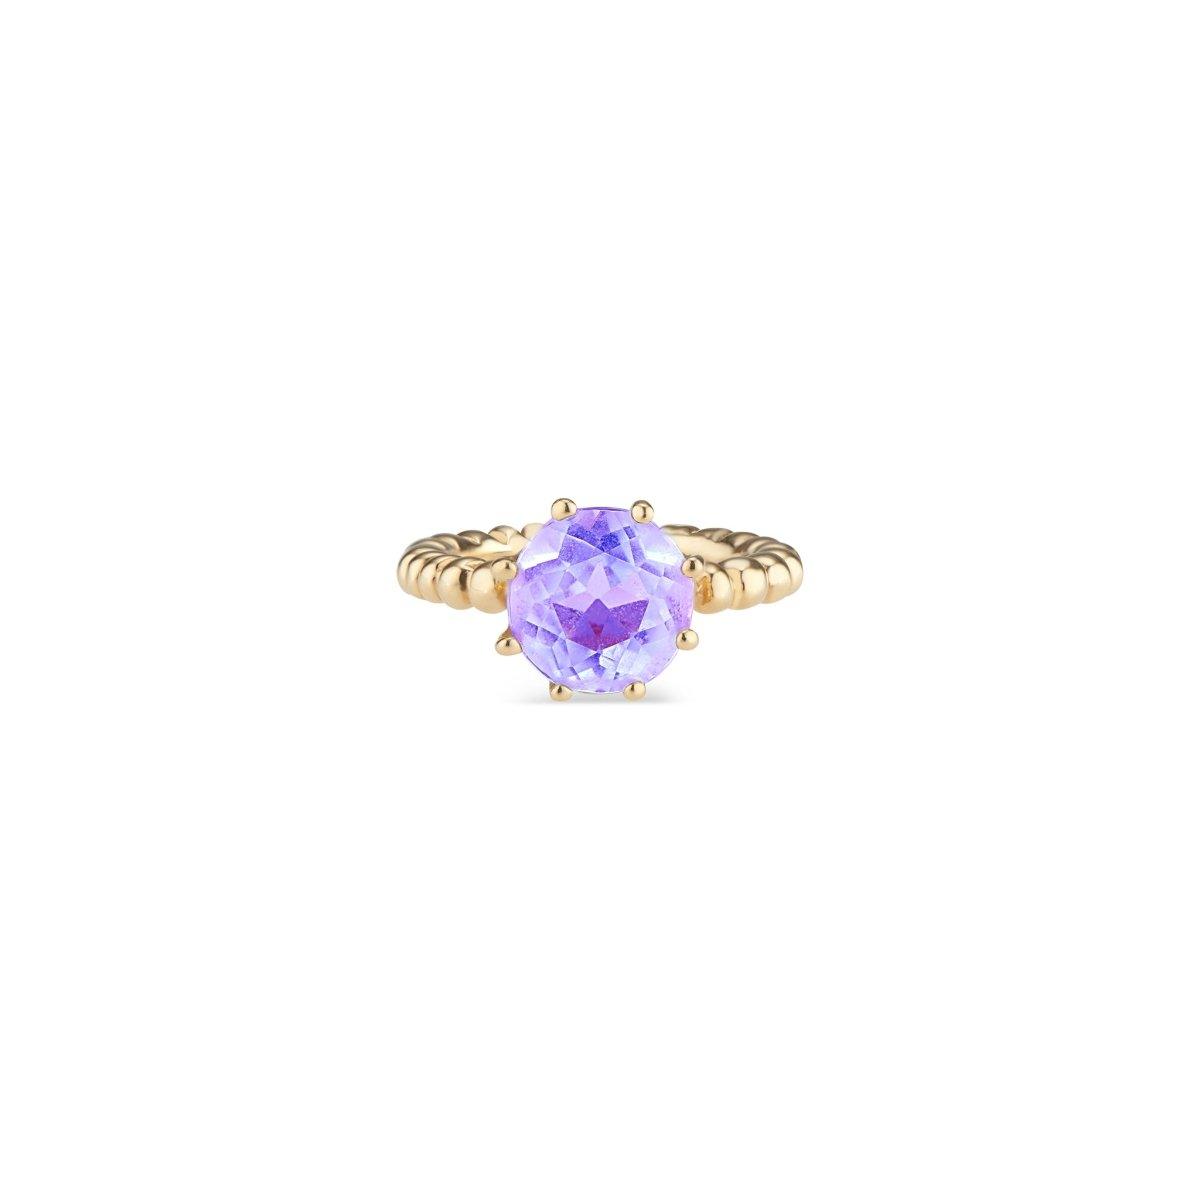 Light Amethyst Crown Ring - Nataly Aponte